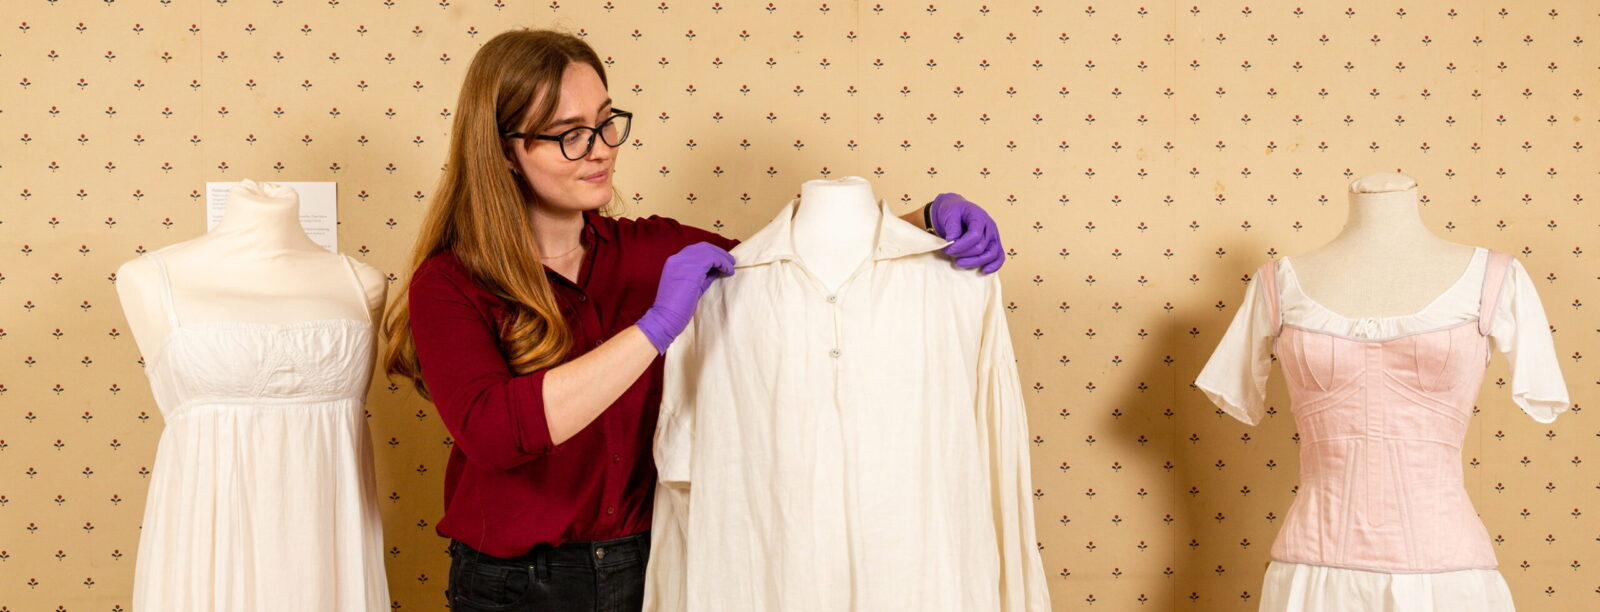 Pictured:  Rebecca Wood with the Colin Firth shirt and (on left) a petticoat worn by Elizabeth Bennet, (made famous by its “six inches deep in mud”), also from the 1995 BBC adaptation of Pride and Prejudice, and (on right) Emma Woodhouse’s stays, worn by Anya Taylor Joy in the 2020 film adaptation of Emma on show at the Jane Austen's House, Museum in Chawton, Hampshire.

It was once voted the most memorable moment in British TV drama history.  Now fans of Colin Firth's iconic portrayal of Pride and Prejudice's Mr Darcy can see in the flesh the famous sodden white shirt in which he enchanted Elizabeth Bennet.

But ardent admirers of both the classic novel and the Oscar-winning actor have been teasingly warned that hugging the garment would be a step too far.  The shirt is the centrepiece of a major new exhibition opening today (Saturday) at Jane Austen's House in Hampshire.  SEE OUR COPY FOR DETAILS.

© Jordan Pettitt/Solent News & Photo Agency
UK +44 (0) 2380 458800